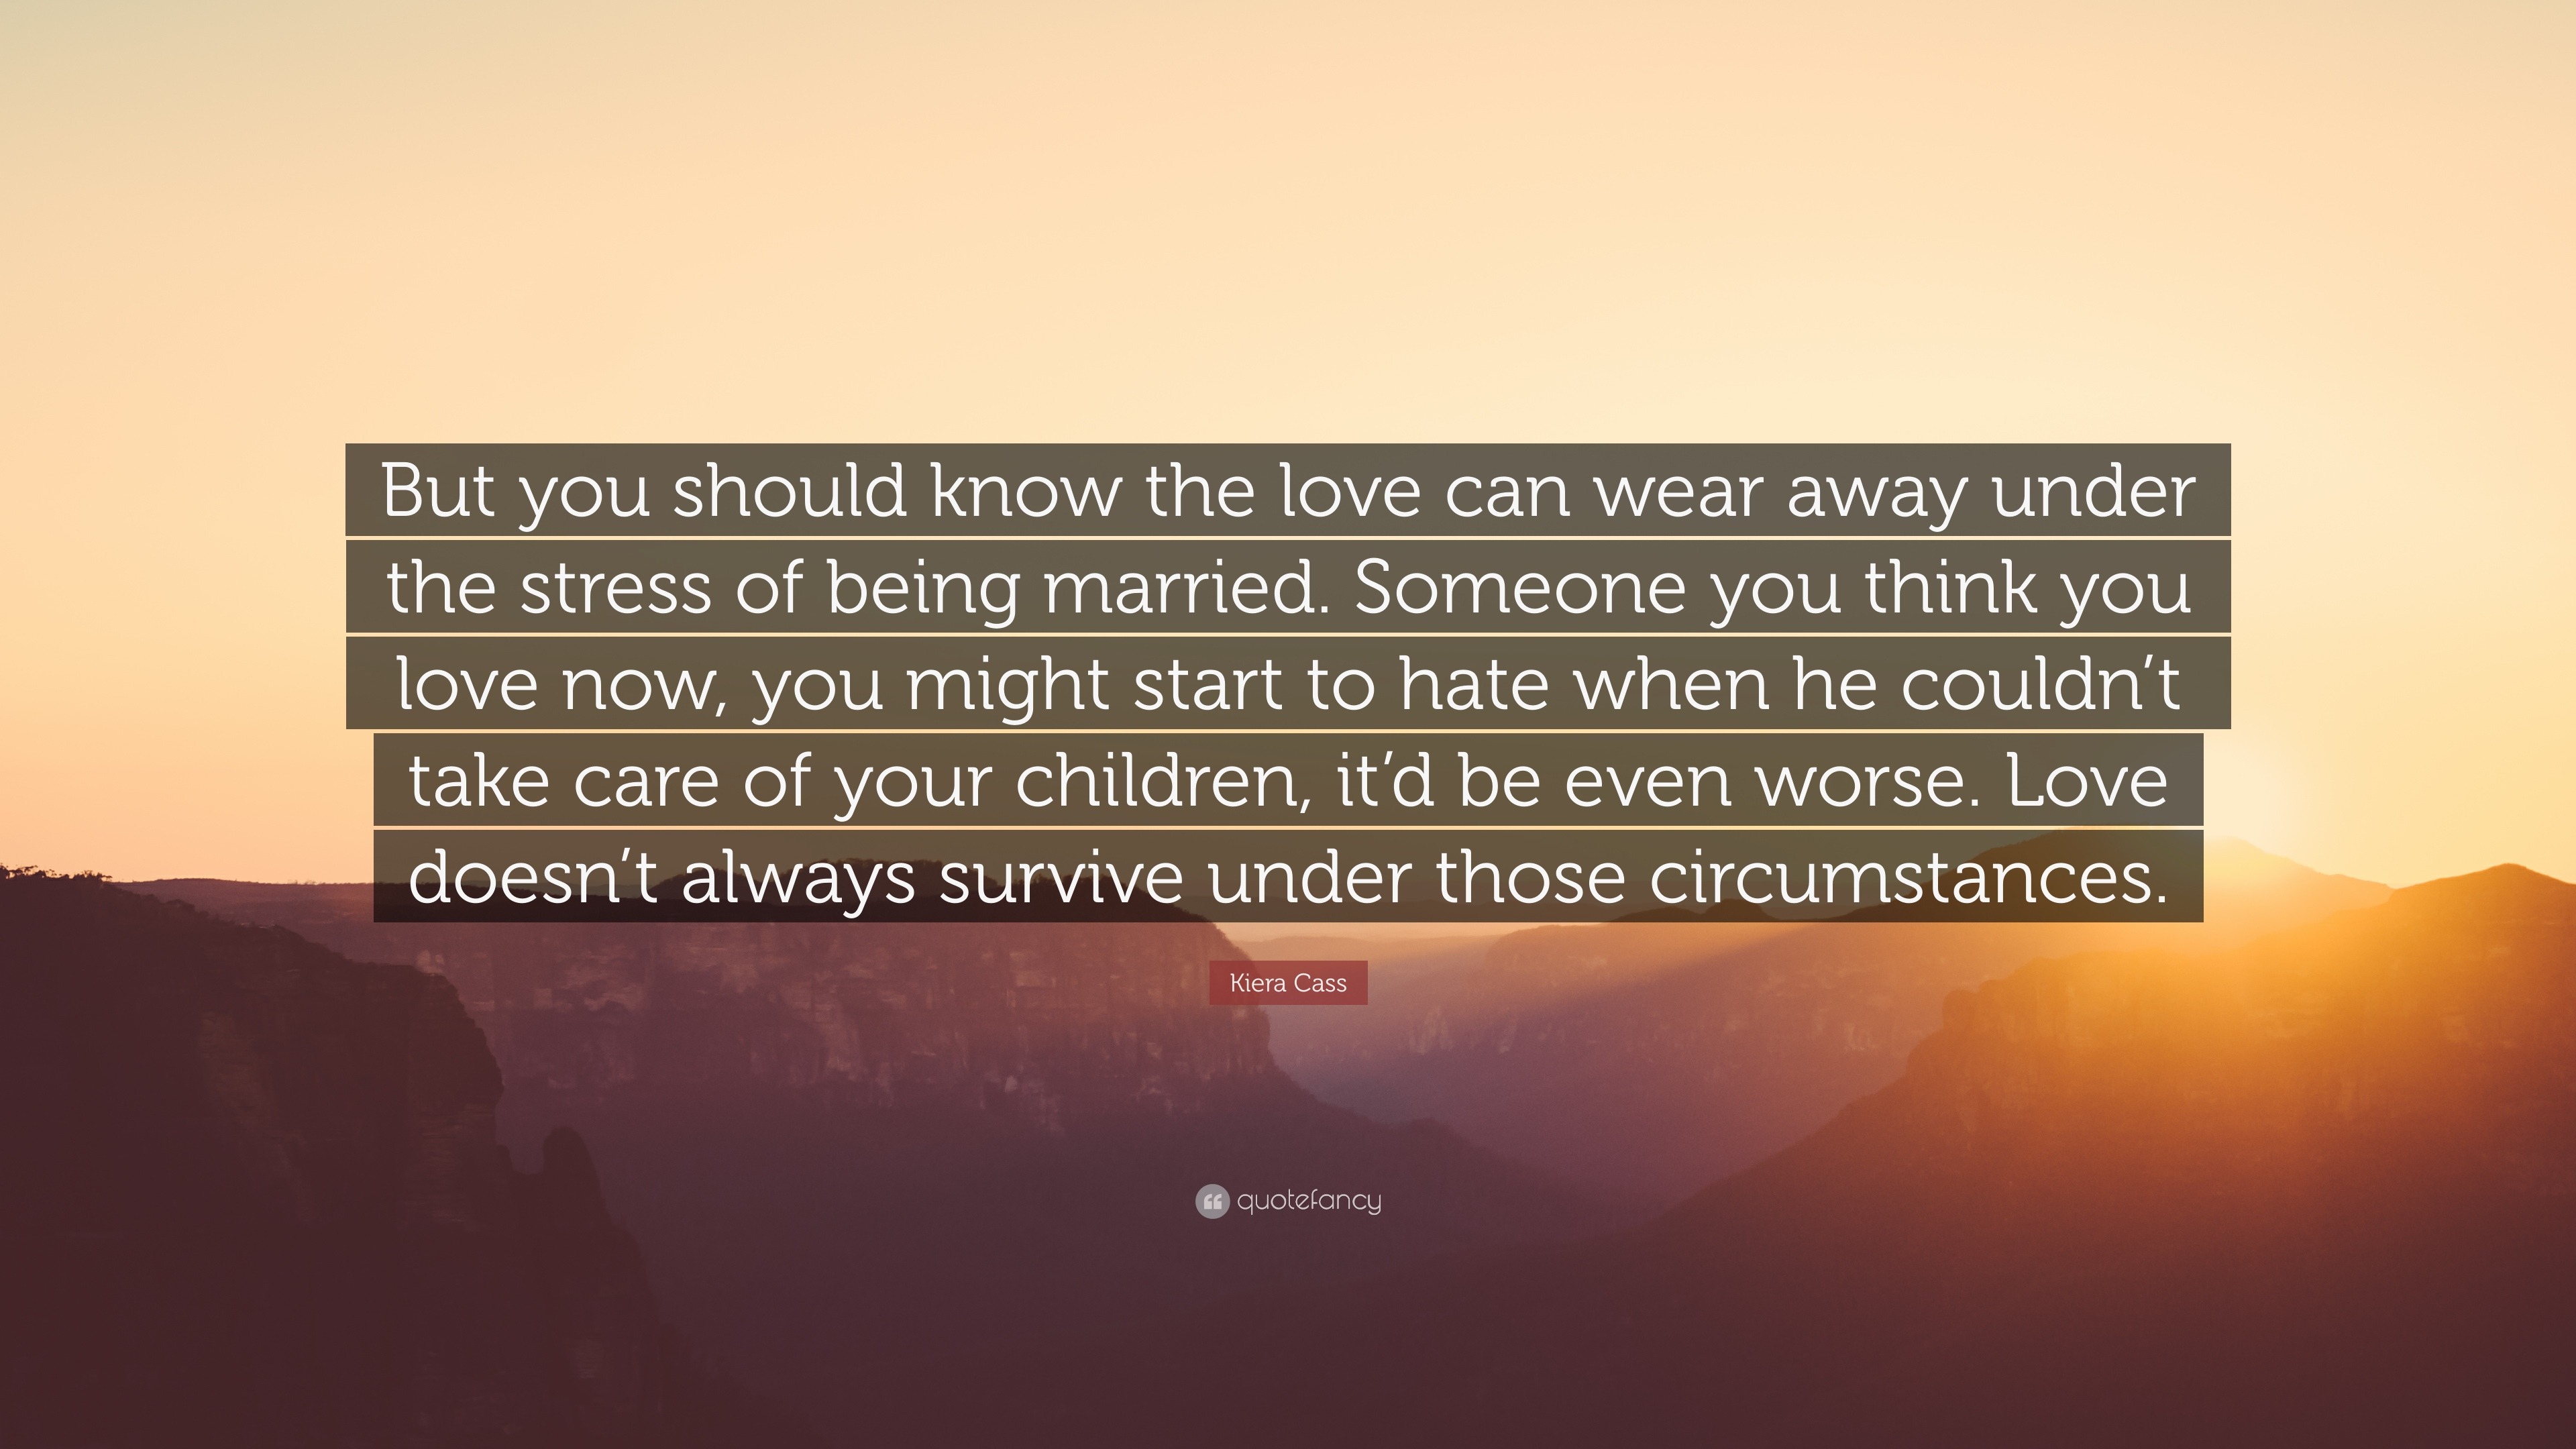 Kiera Cass Quote “But you should know the love can wear away under the